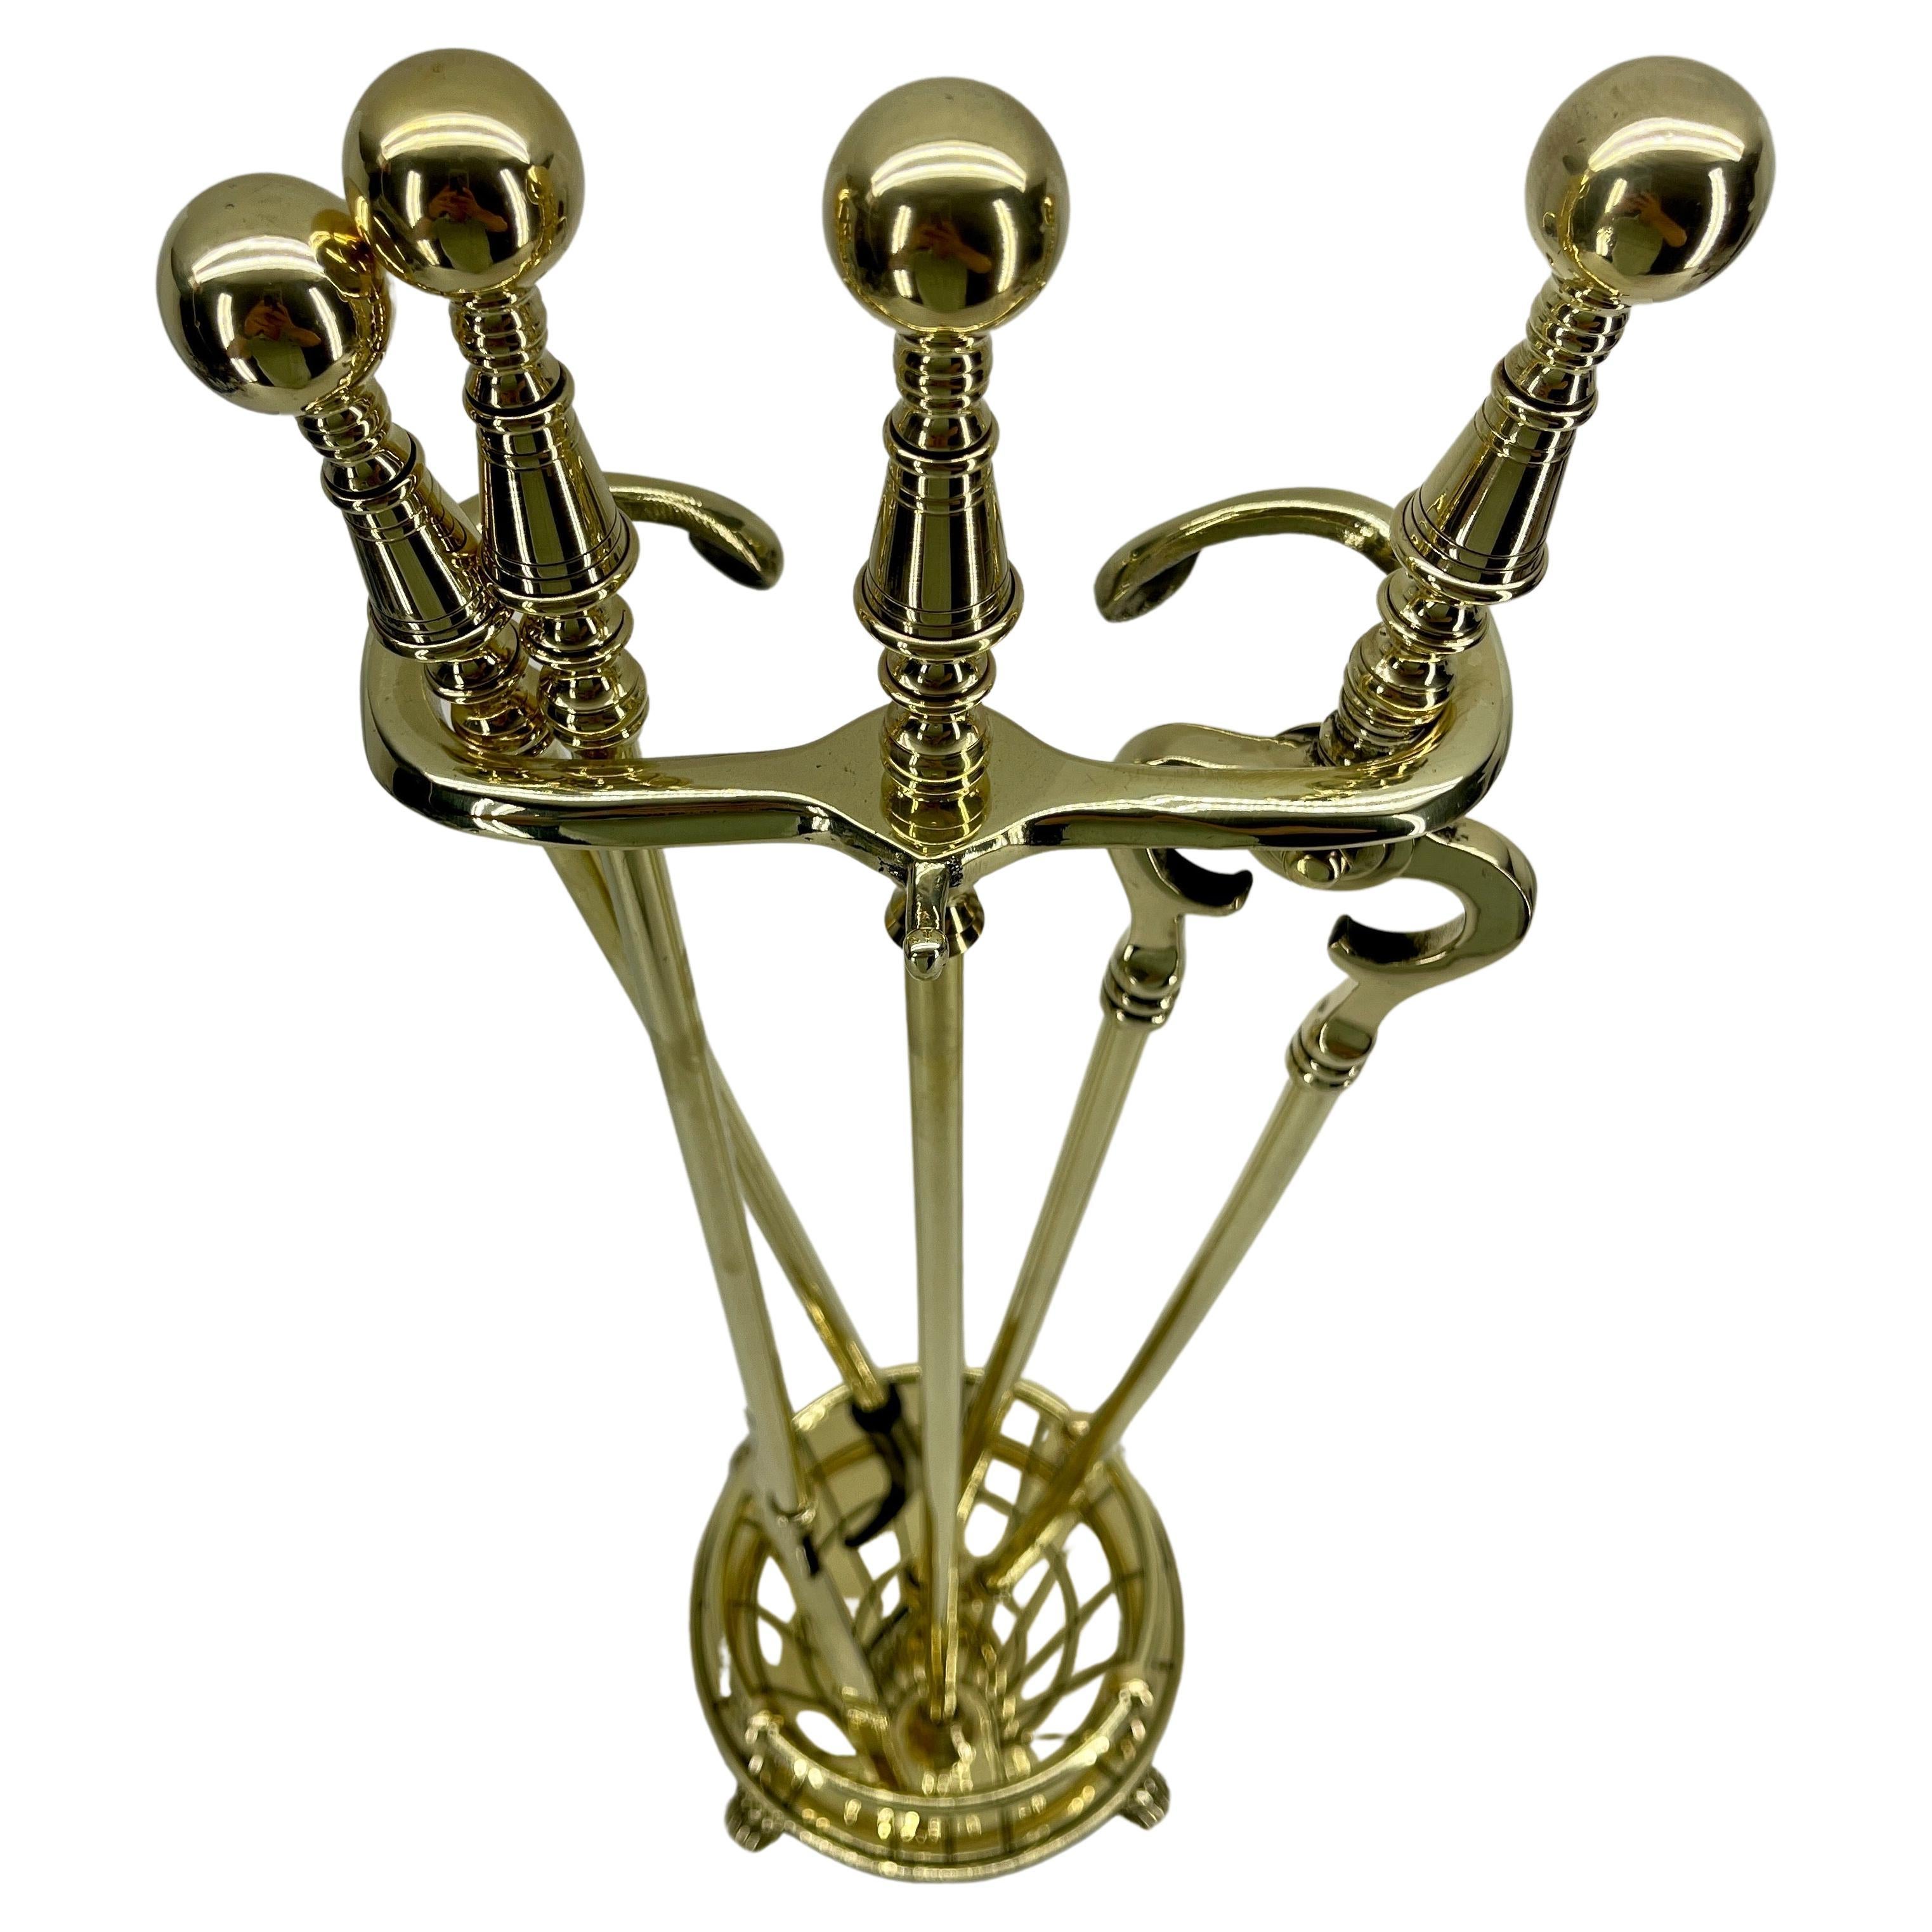 20th Century American 3 Piece Set of Brass Fireplace Tools with Spider Web Decor For Sale